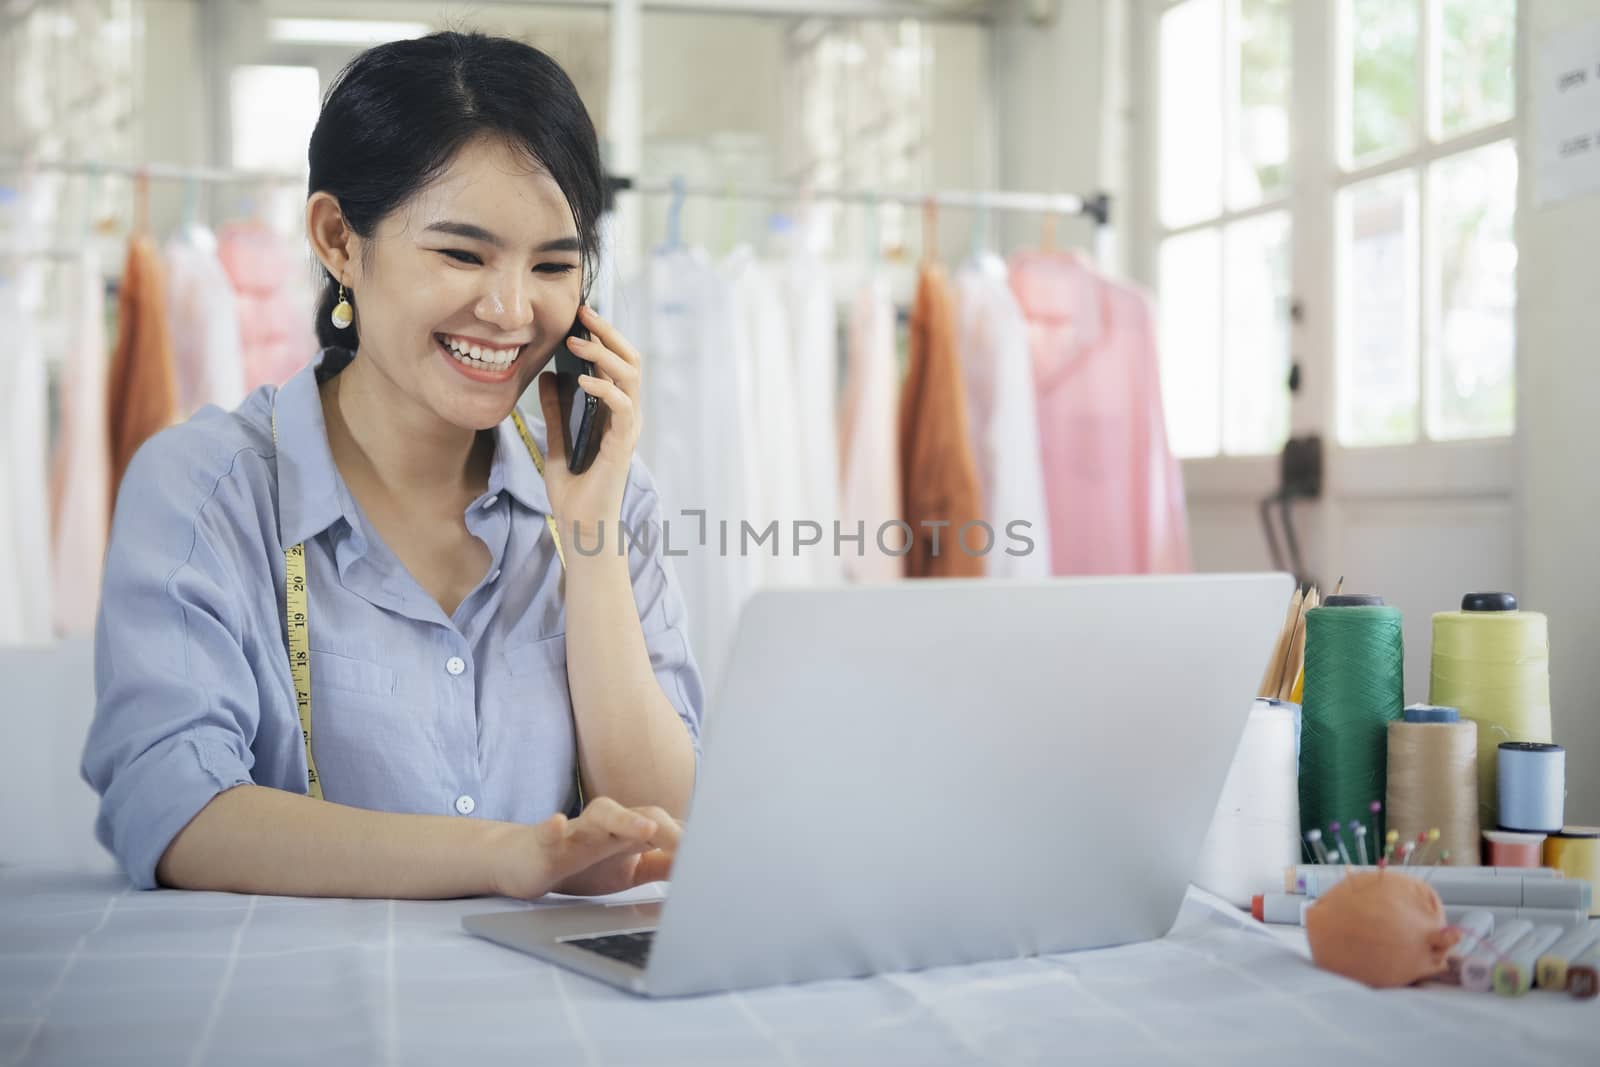 Young tailor design owner woman talking with customer on smart phone in her studio with clothes hanging in the background. Business owner shop and entrepreneur concept.